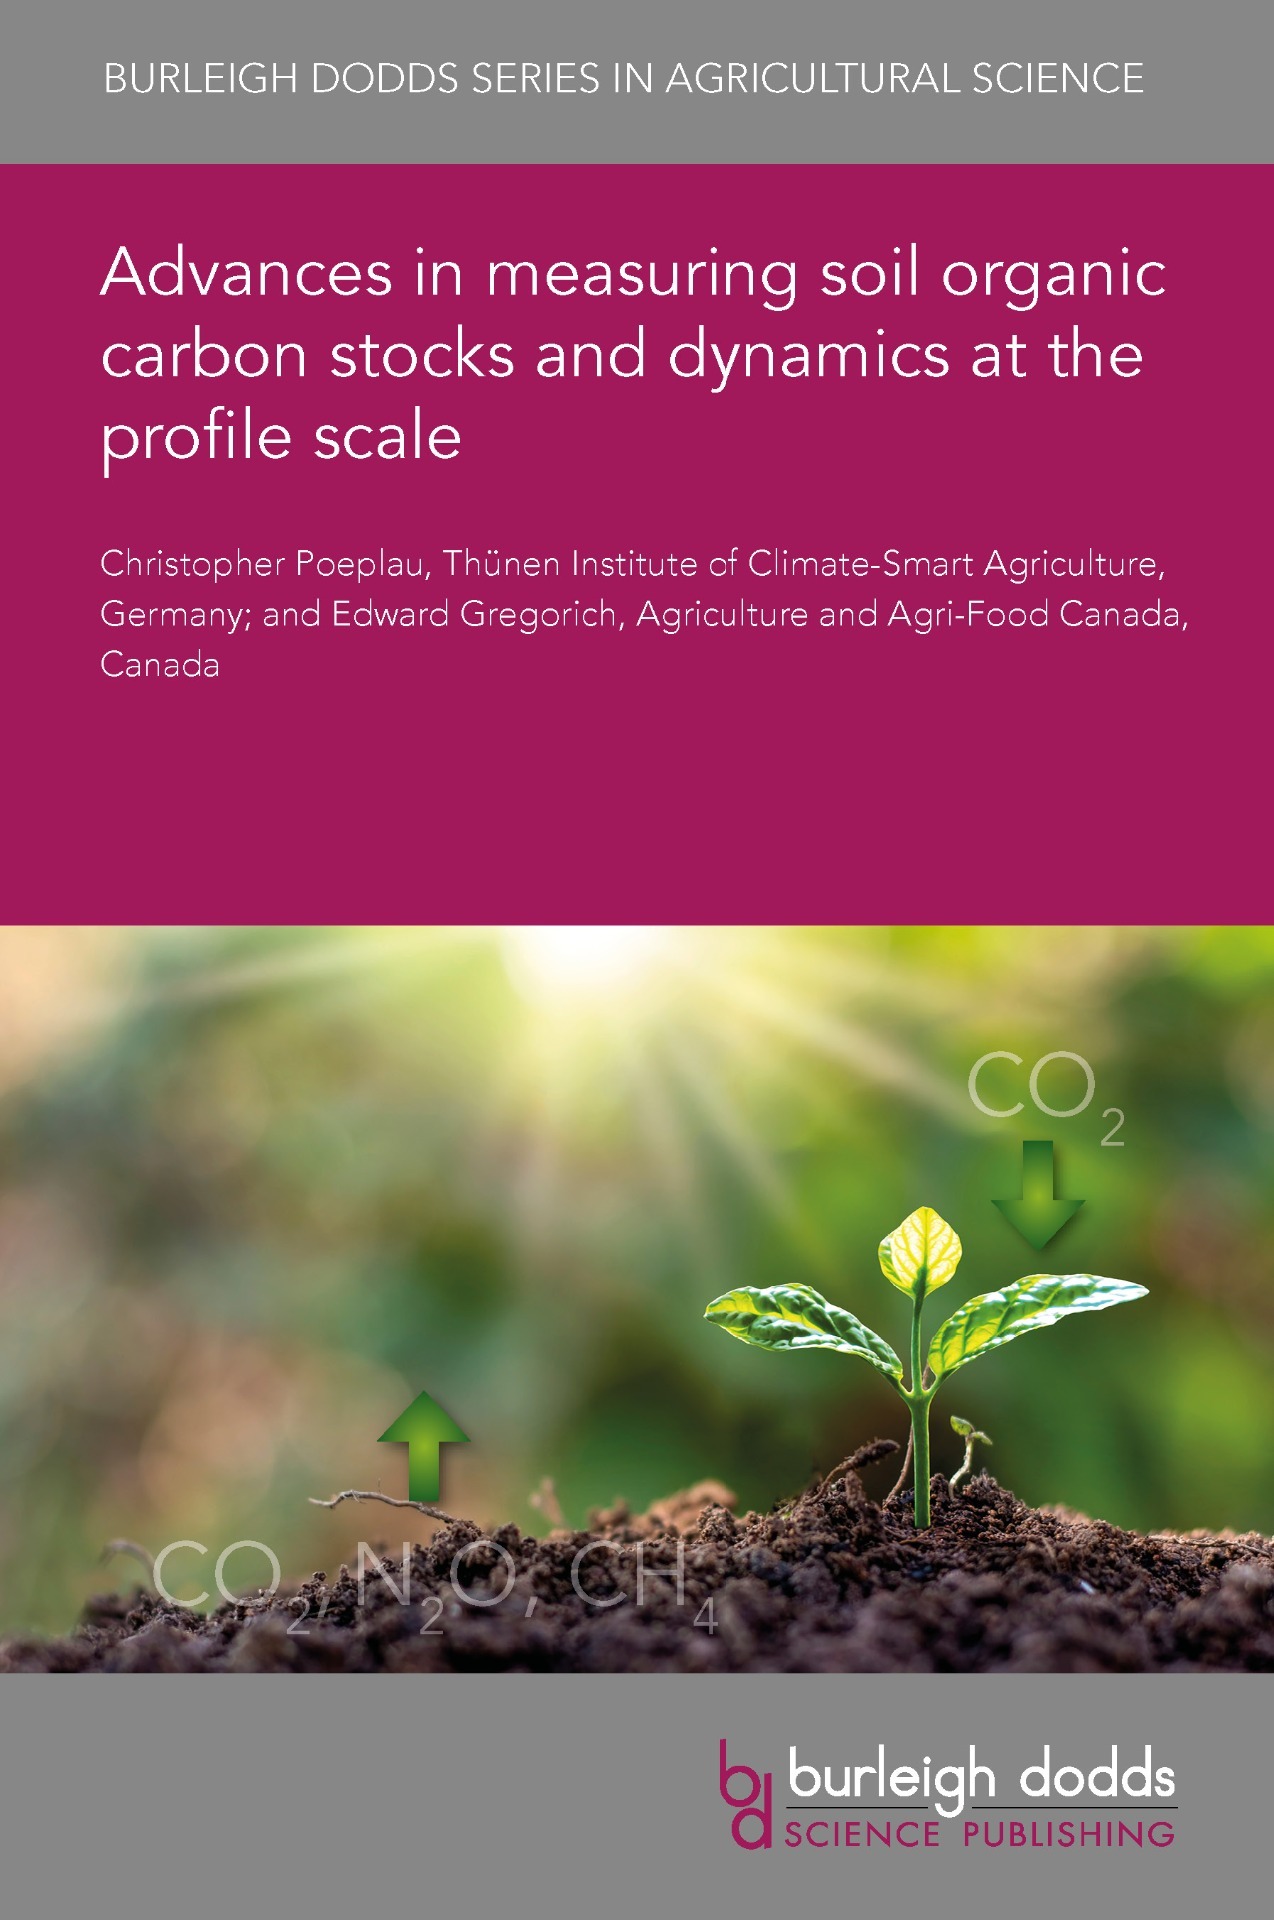 Advances in measuring soil organic carbon stocks and dynamics at the profile scale